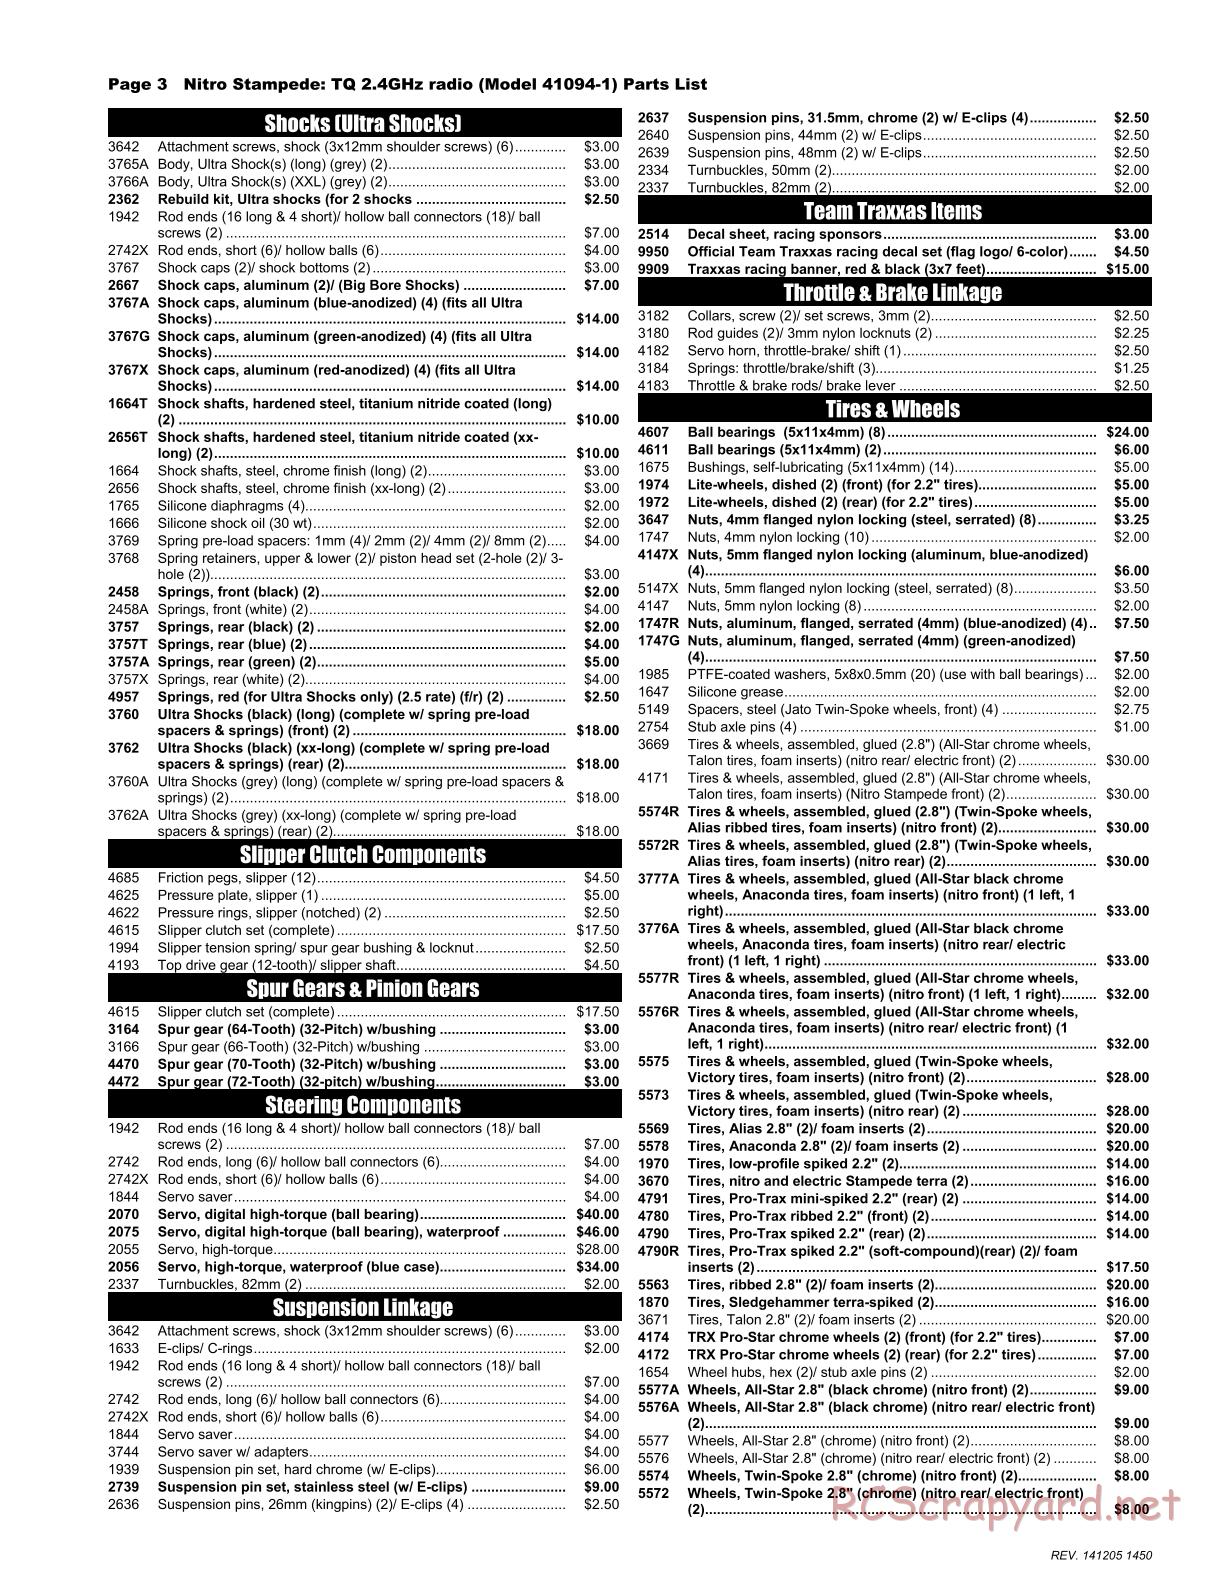 Traxxas - Nitro Stampede (2015) - Parts List - Page 3